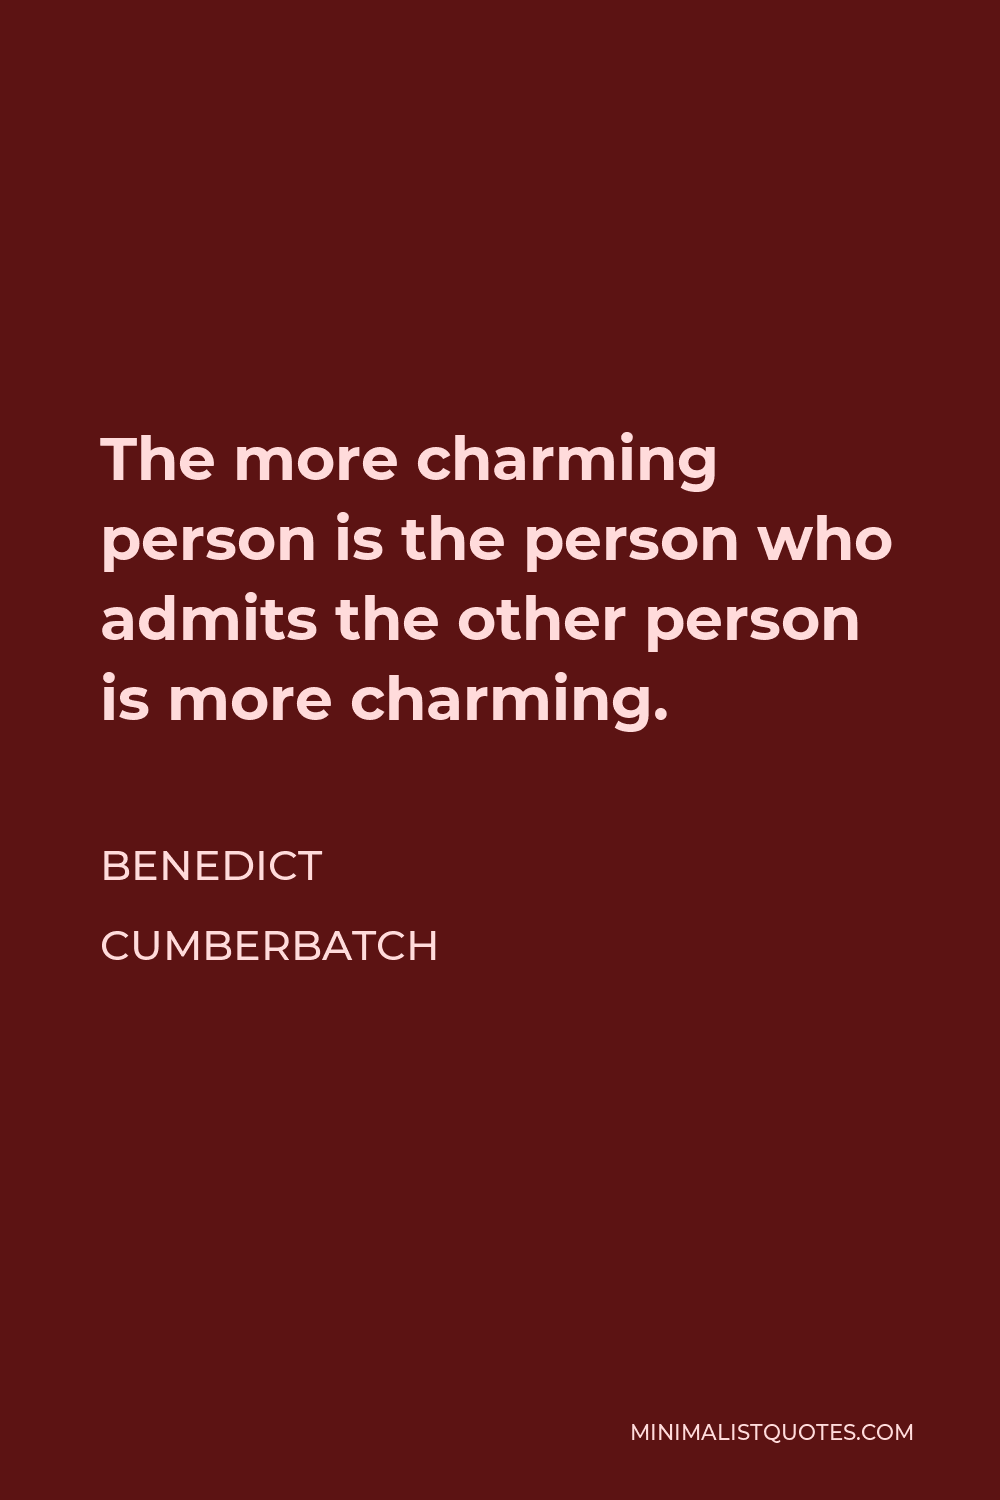 Benedict Cumberbatch Quote - The more charming person is the person who admits the other person is more charming.